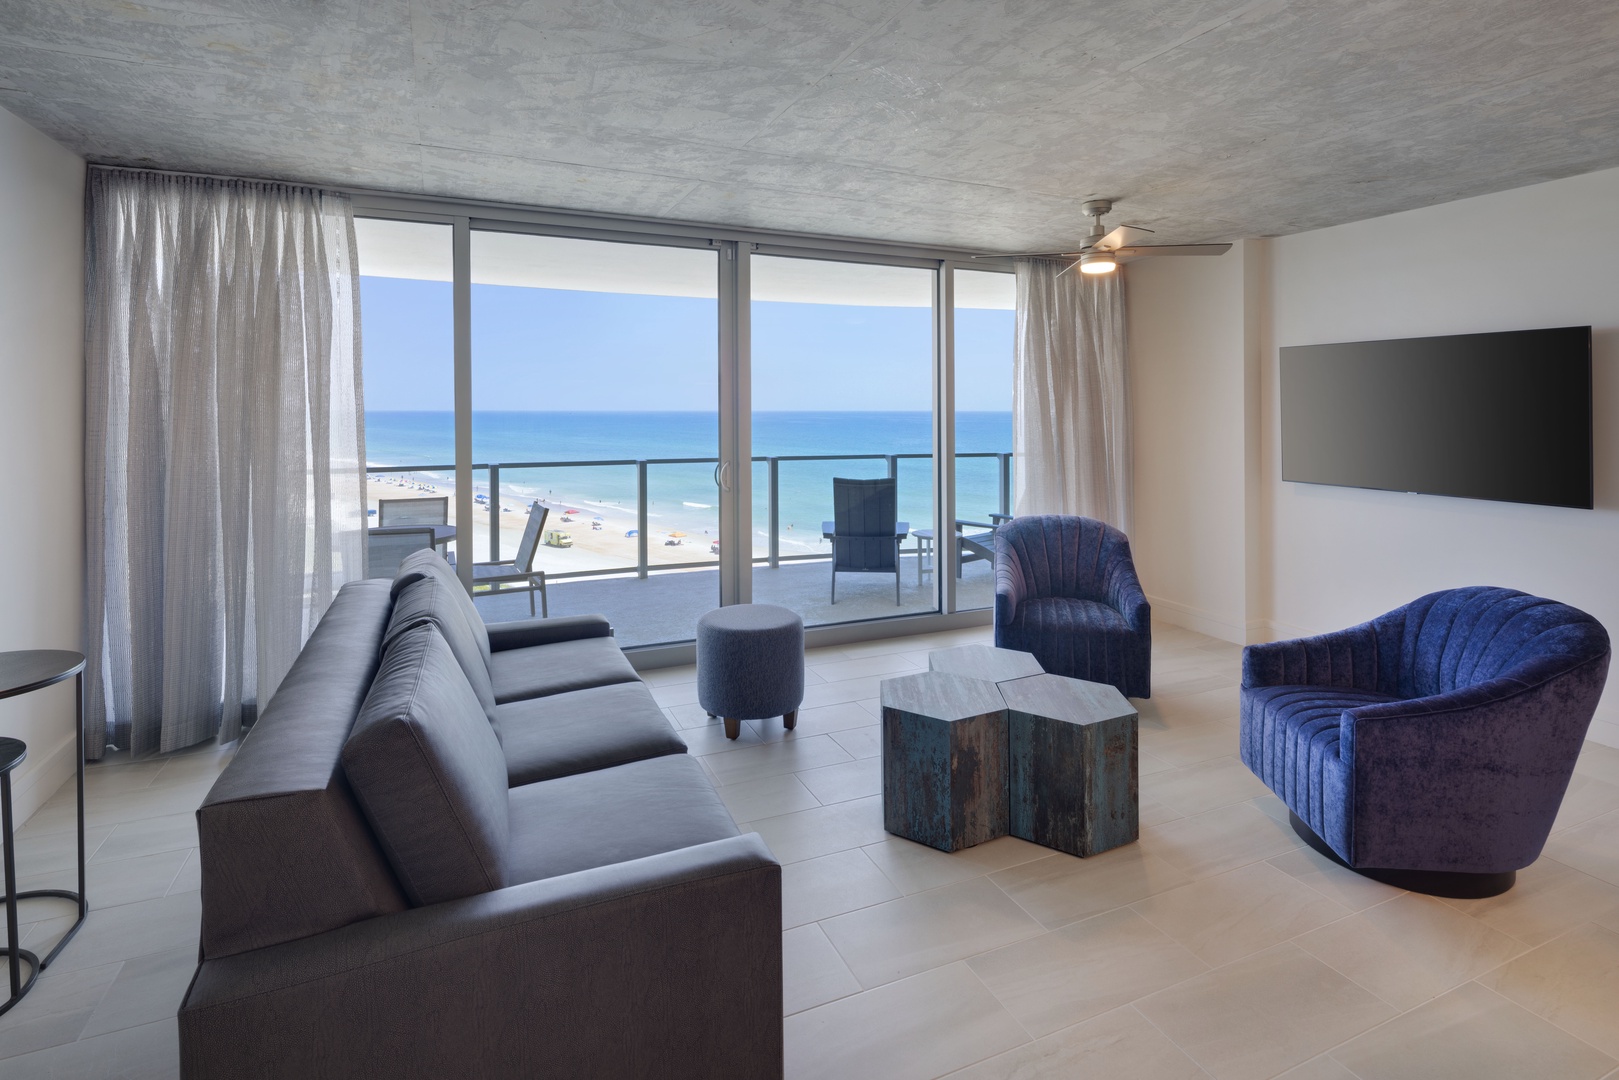 Your Oasis of Tranquility: Immerse Yourself in the Seaview Serenity of the Living Space